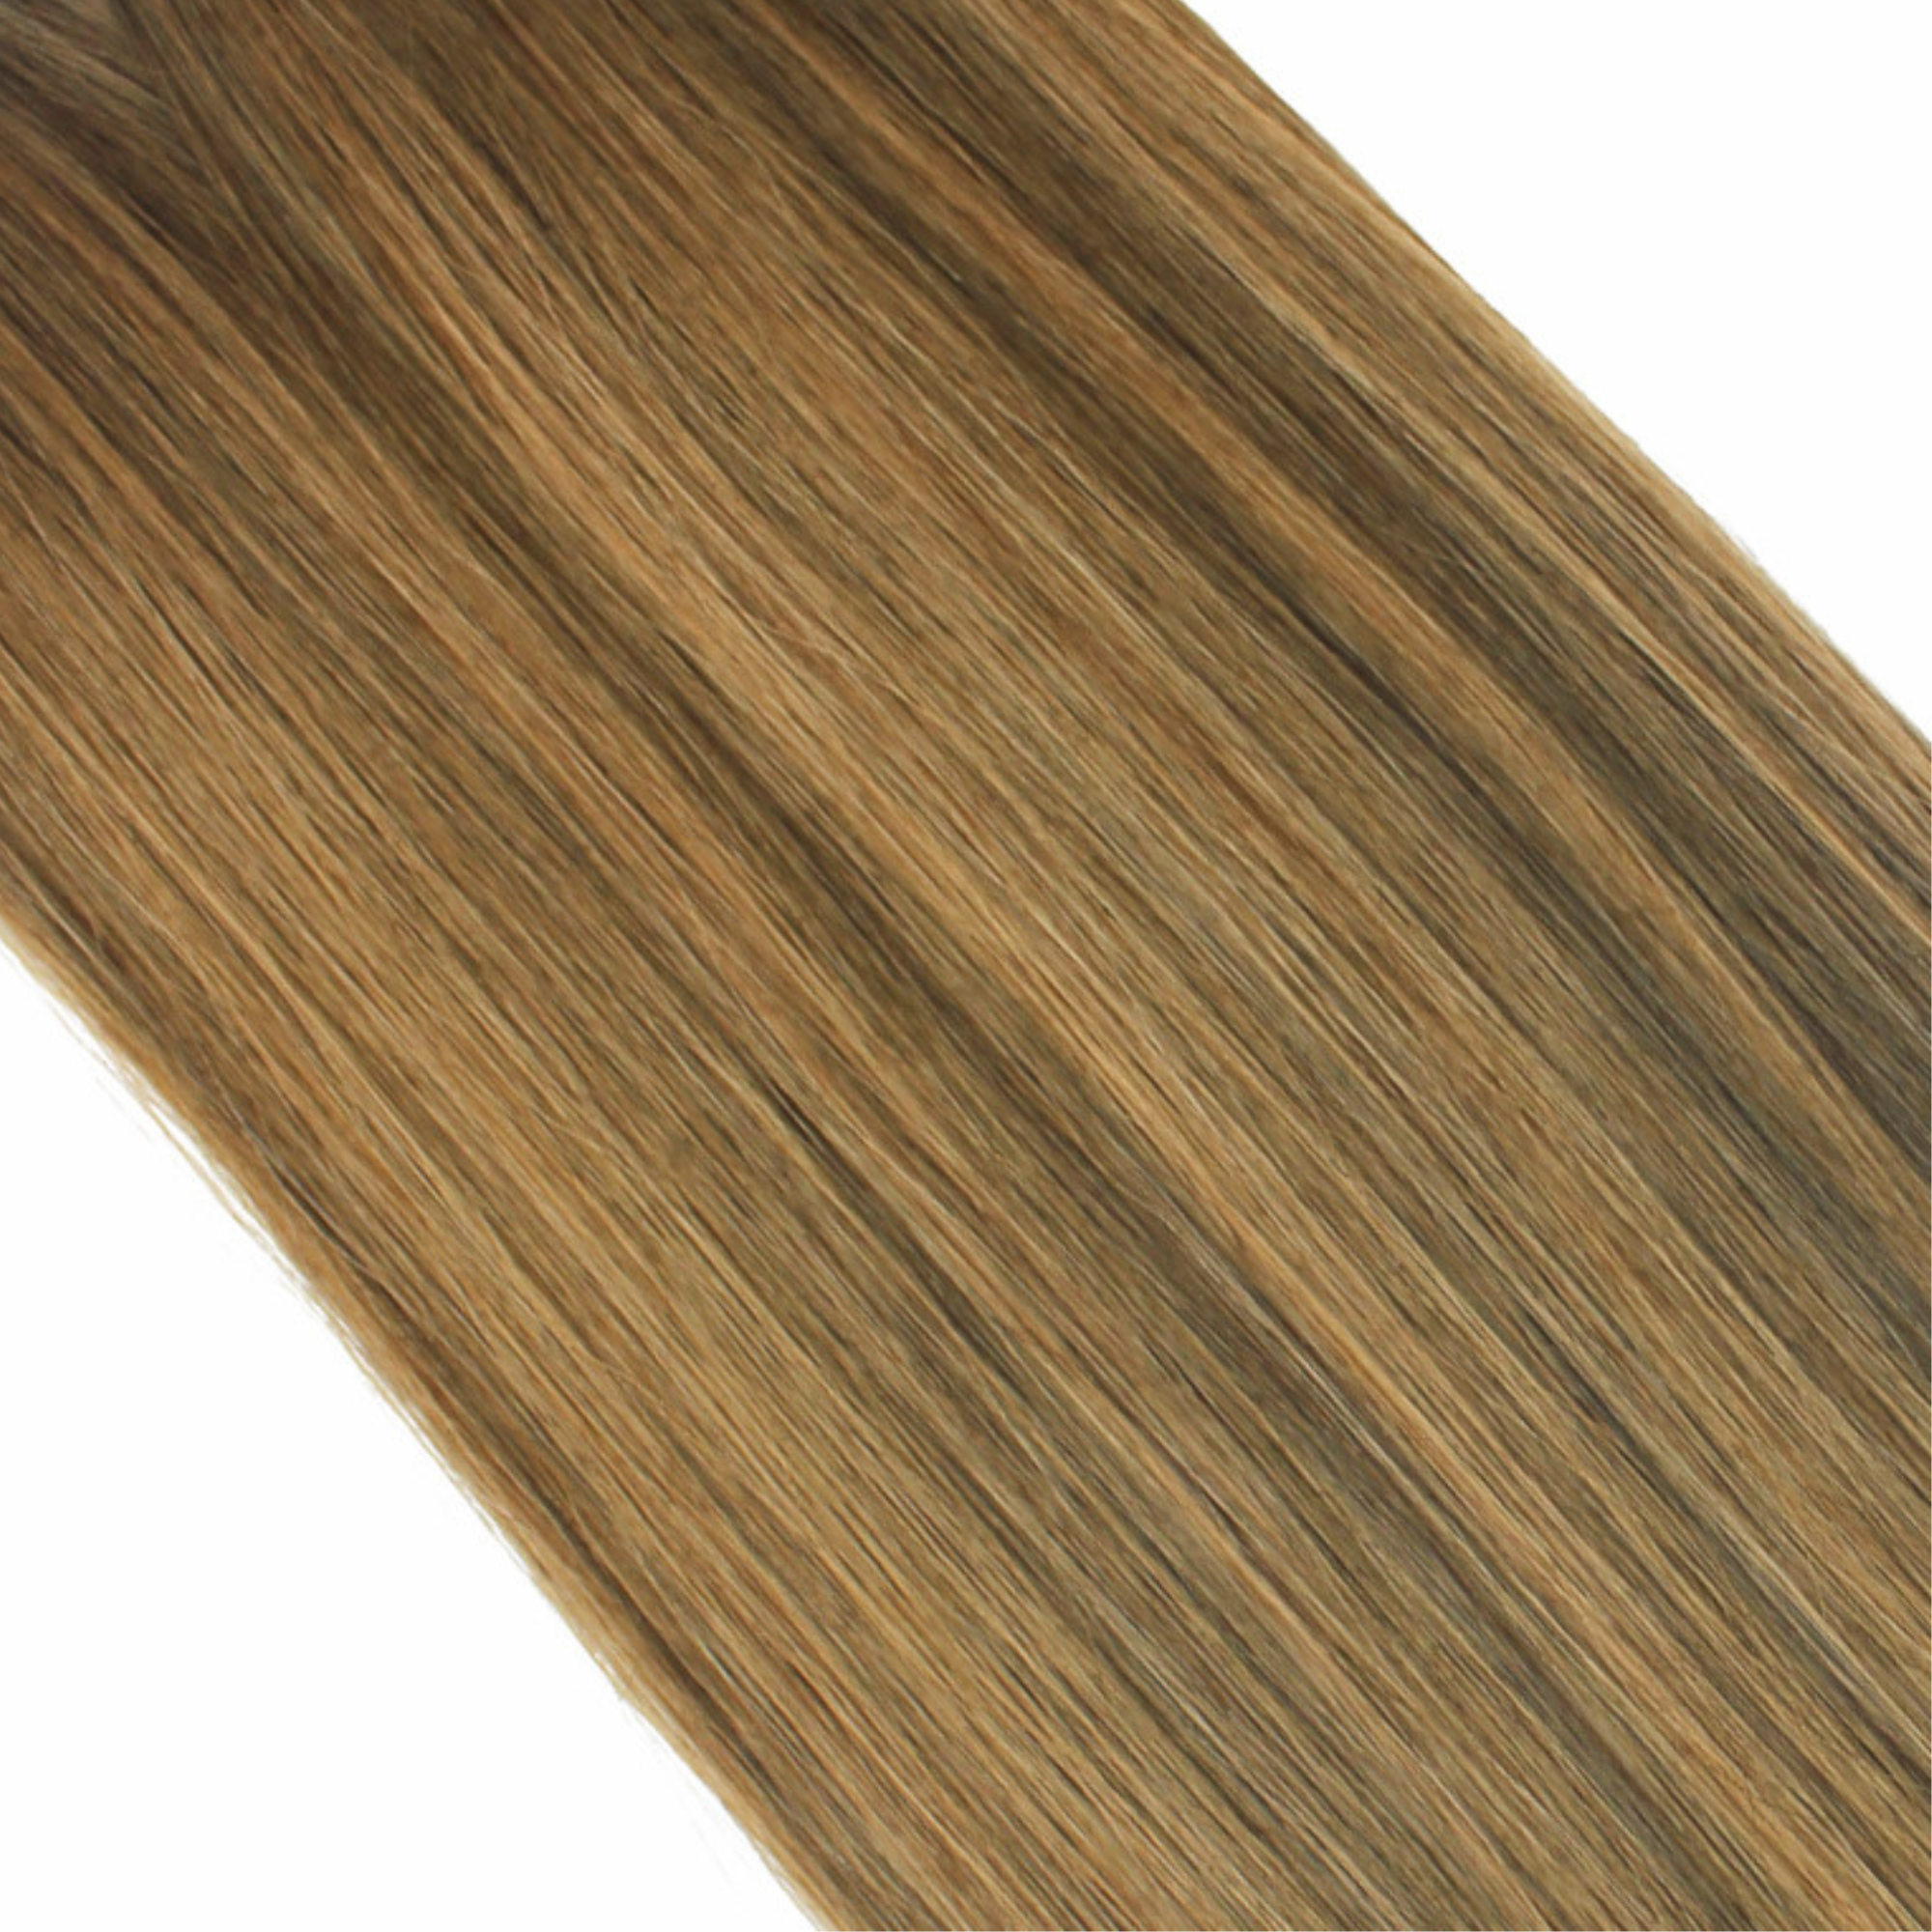 "hair rehab london 18" tape hair extensions shade swatch titled blonde af"